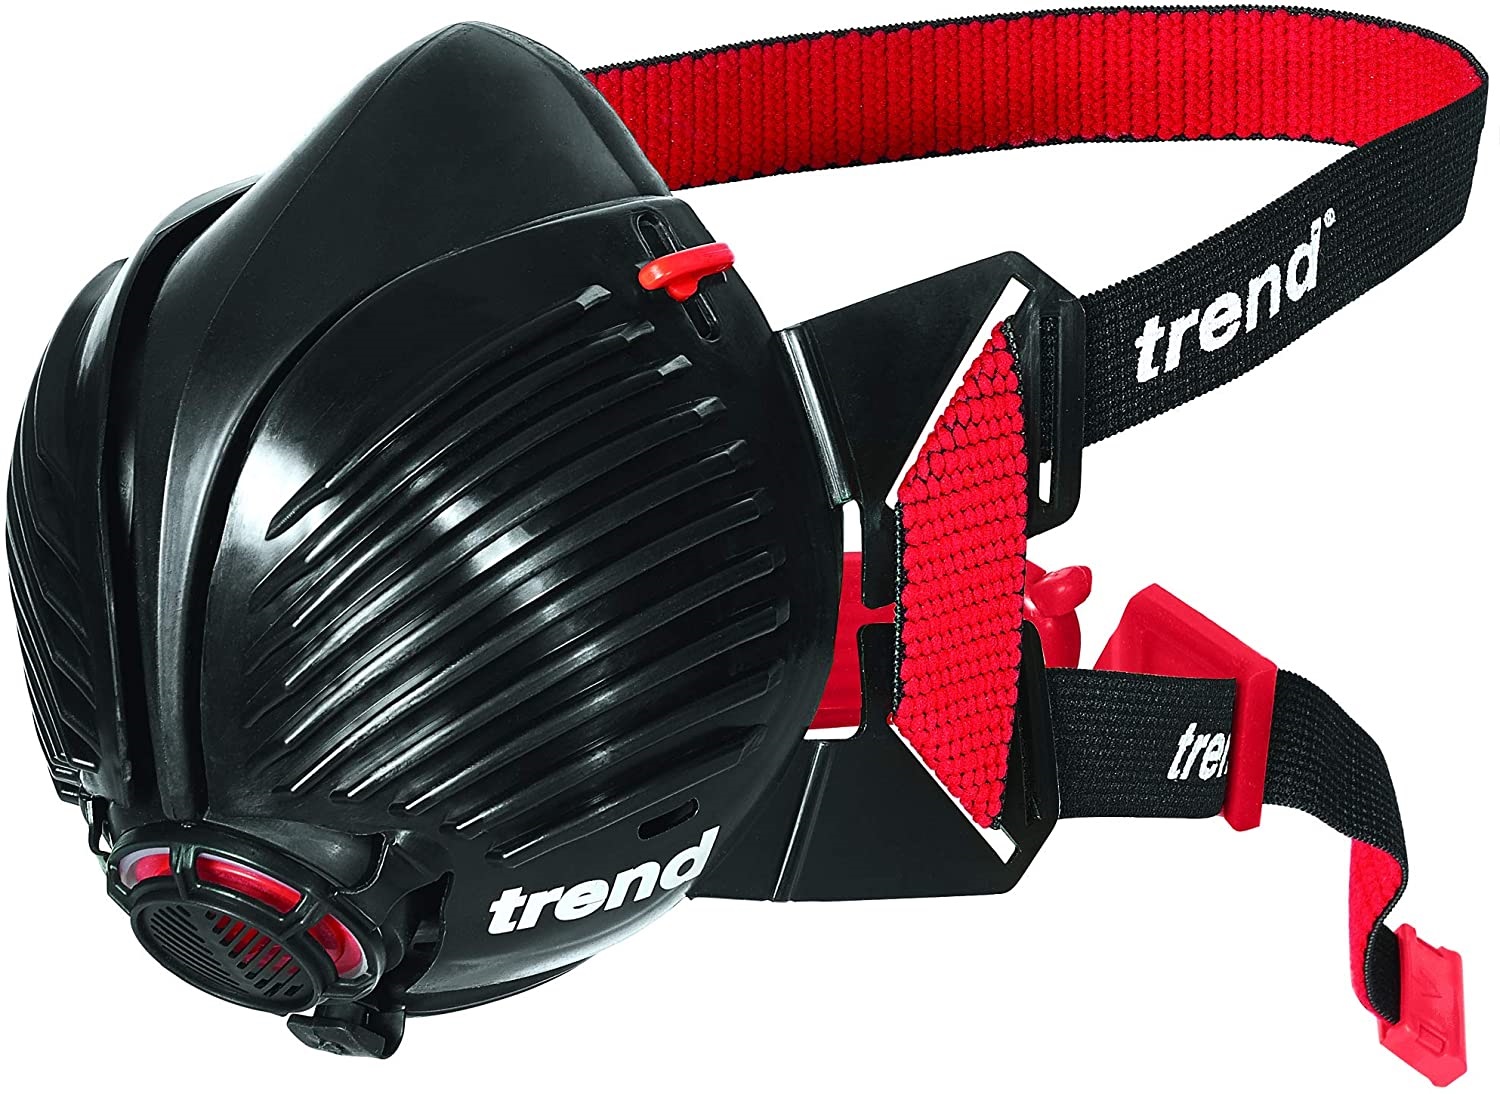 Trend STEALTH Respirator Mask with Filters